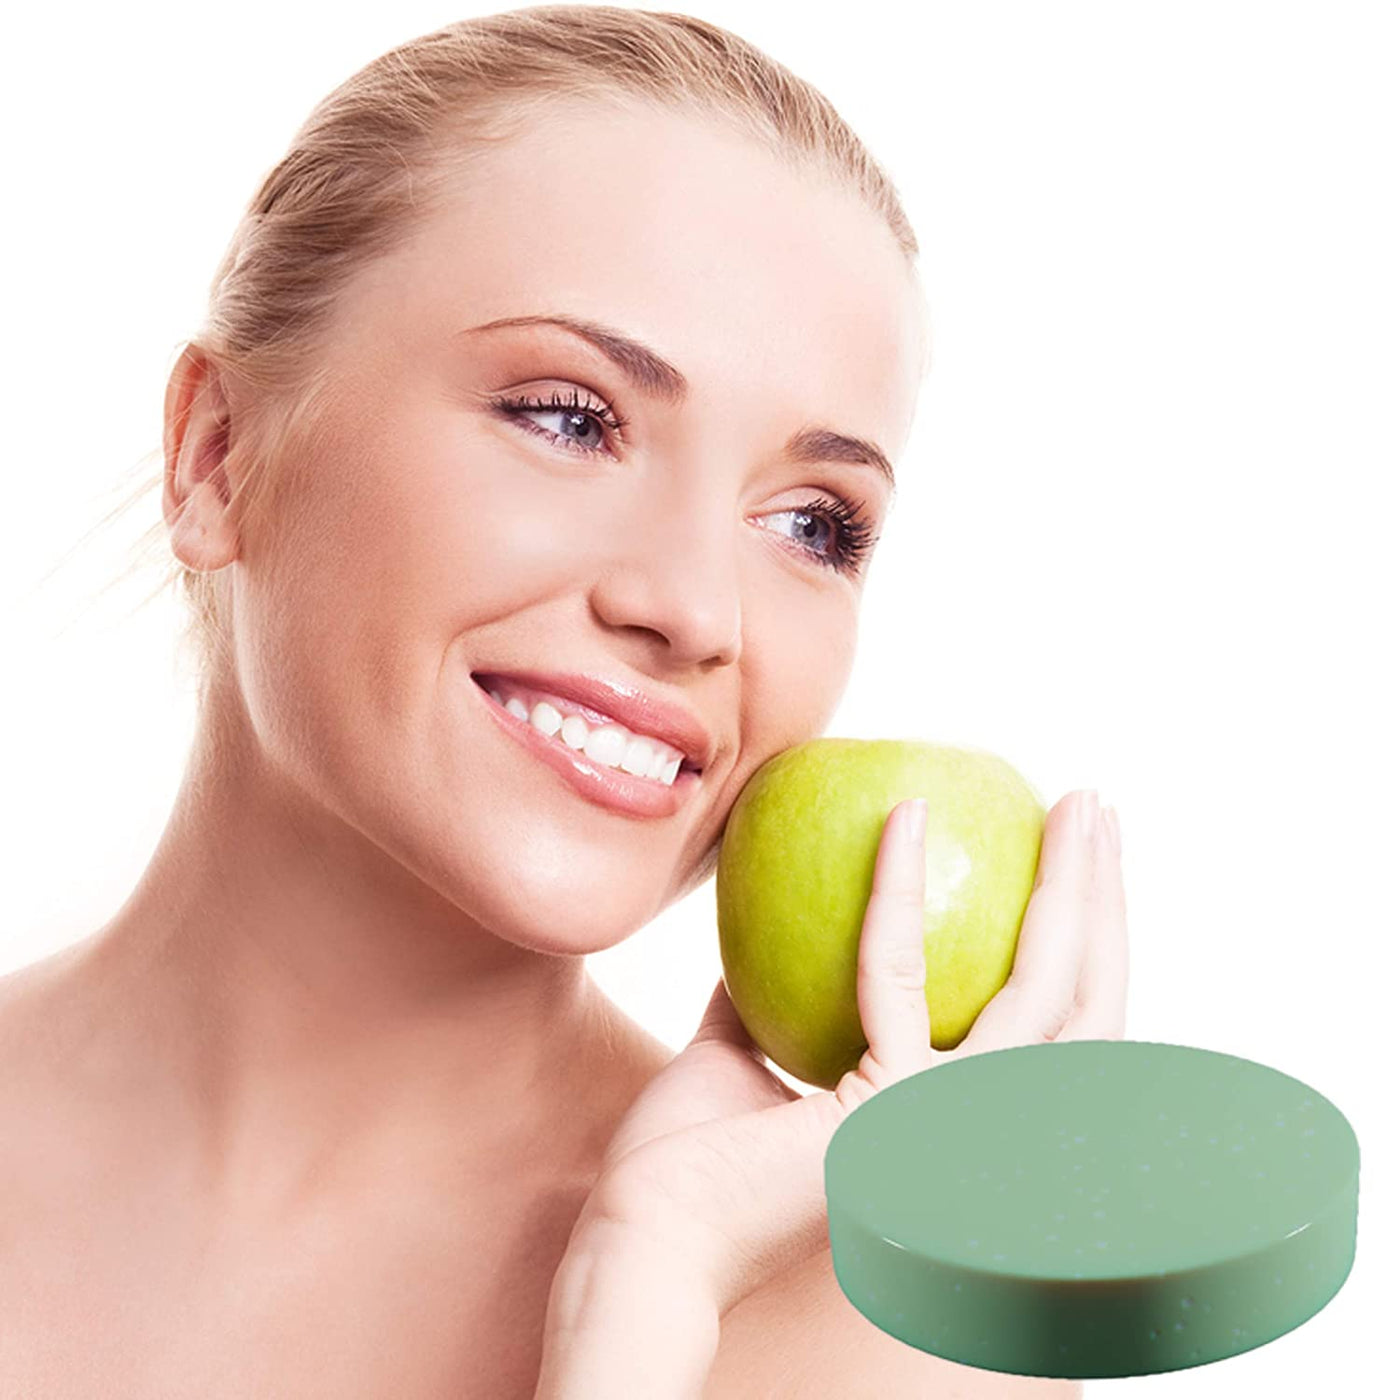 Swiss Botany Beauty 3.4 Ounce / Granny Smith Apple Green / 1 Swiss Apple Stem Cell Soap Bar (3.4 Oz 1 Bar) Organic Age Defying Formula is 100% Handcrafted with Coconut Oil & Tetrapeptide-7 for ultimate moisturizing & wrinkle prevention